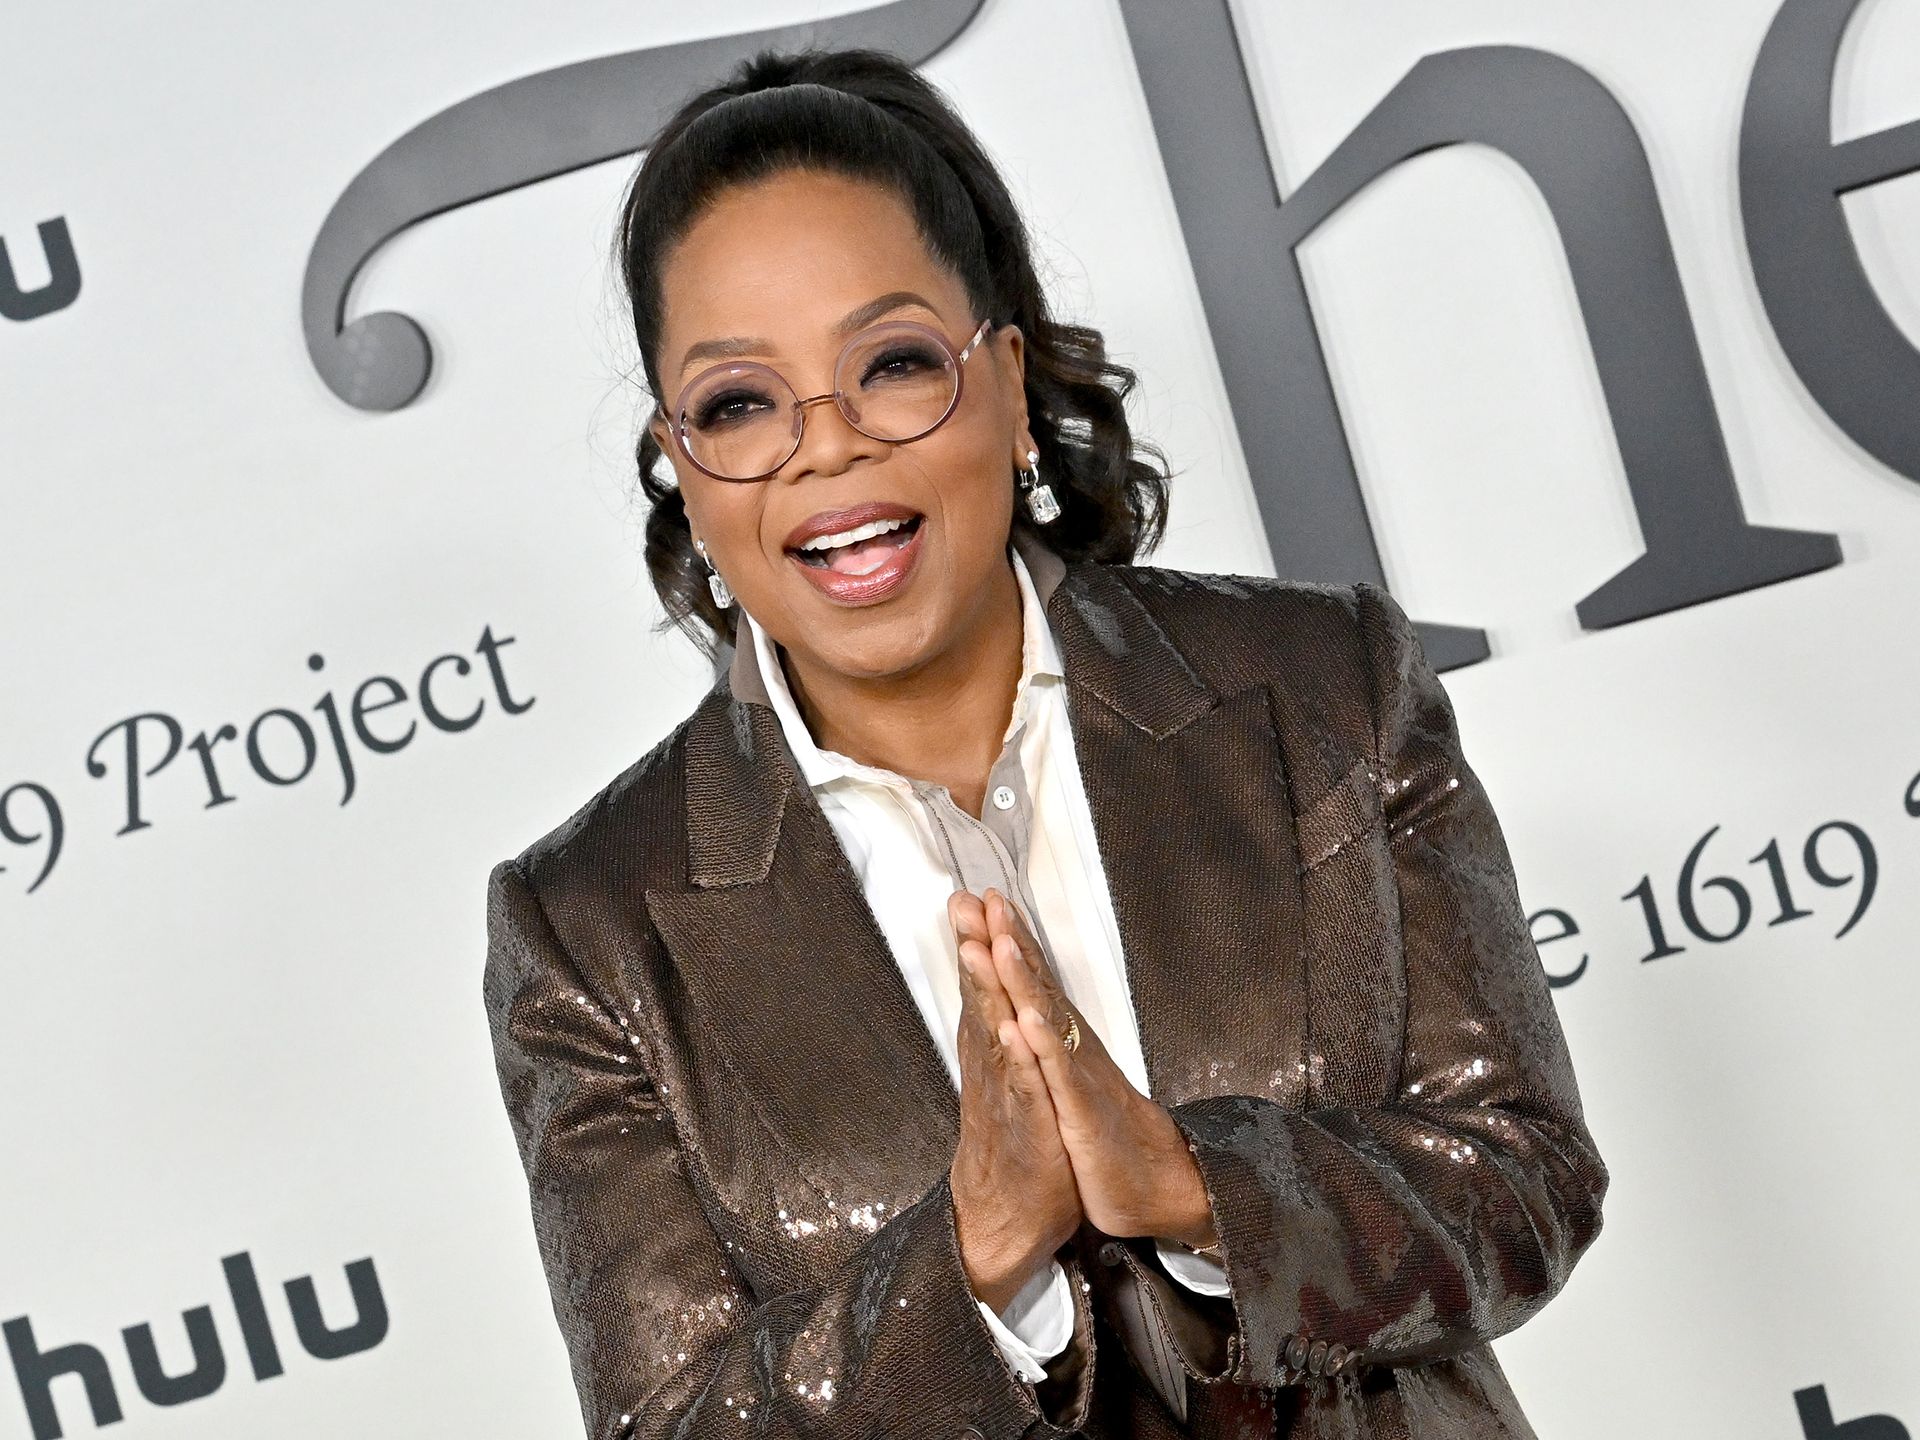 Oprah Winfrey says she “starved” herself for “five months” while